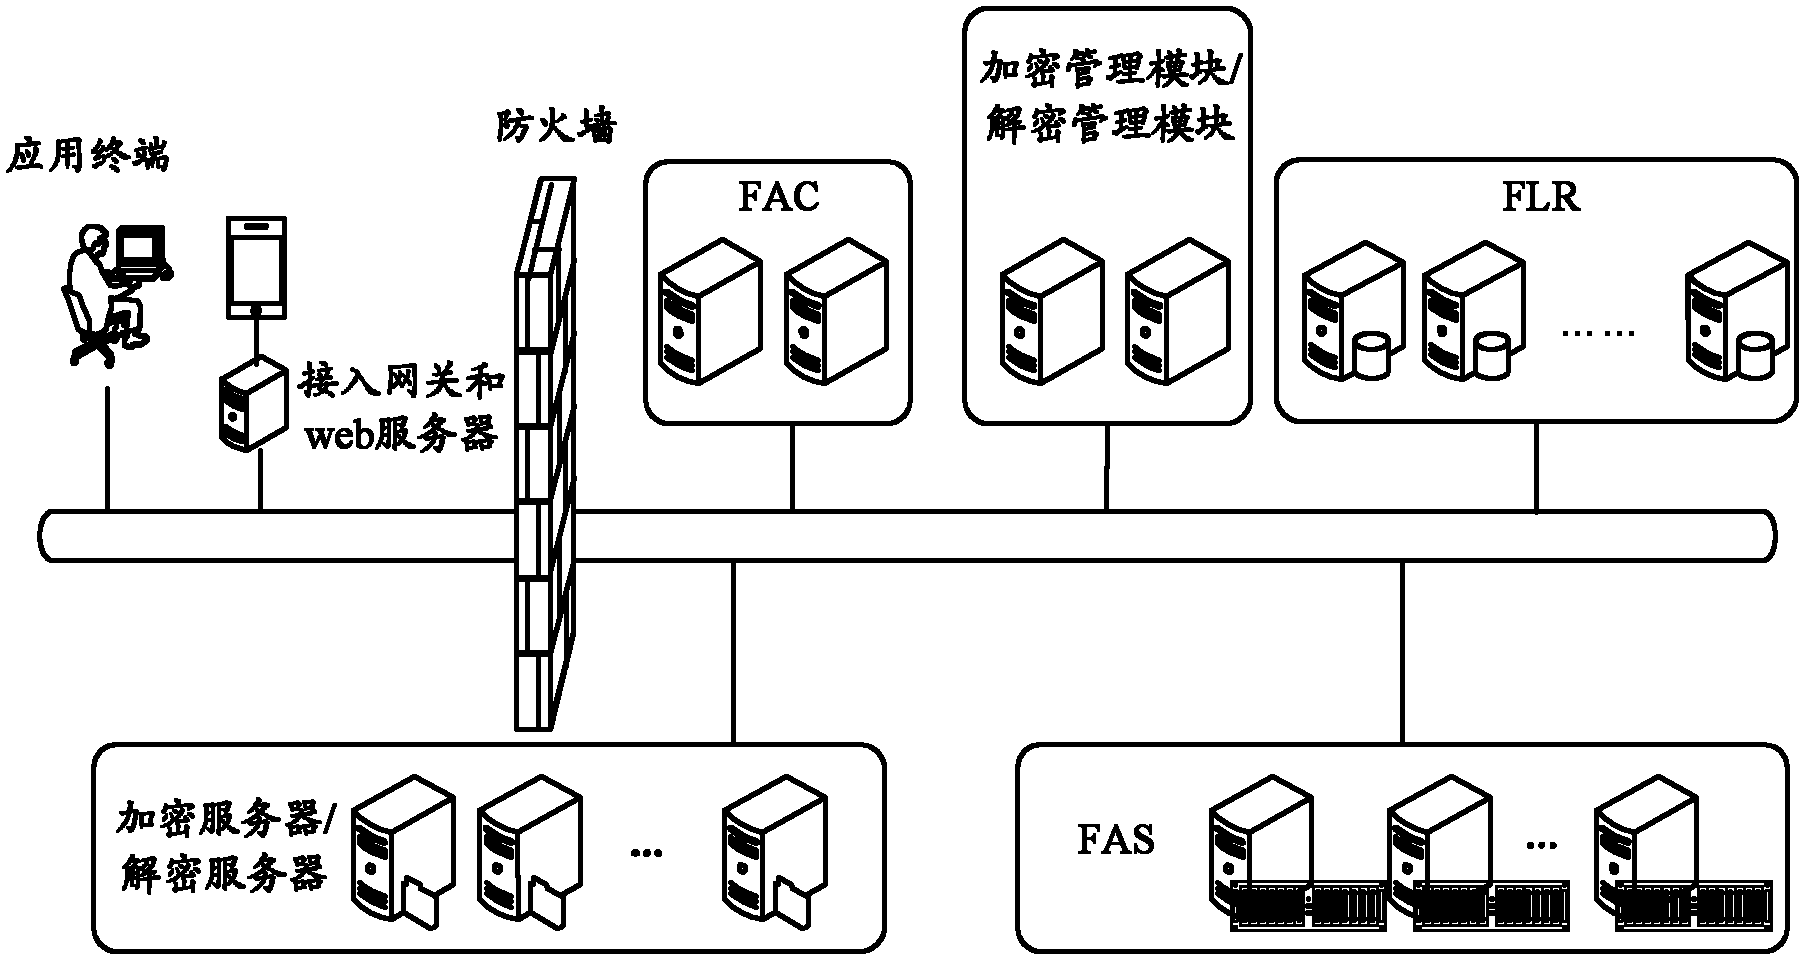 File encryption and decryption method and system based on cloud storage